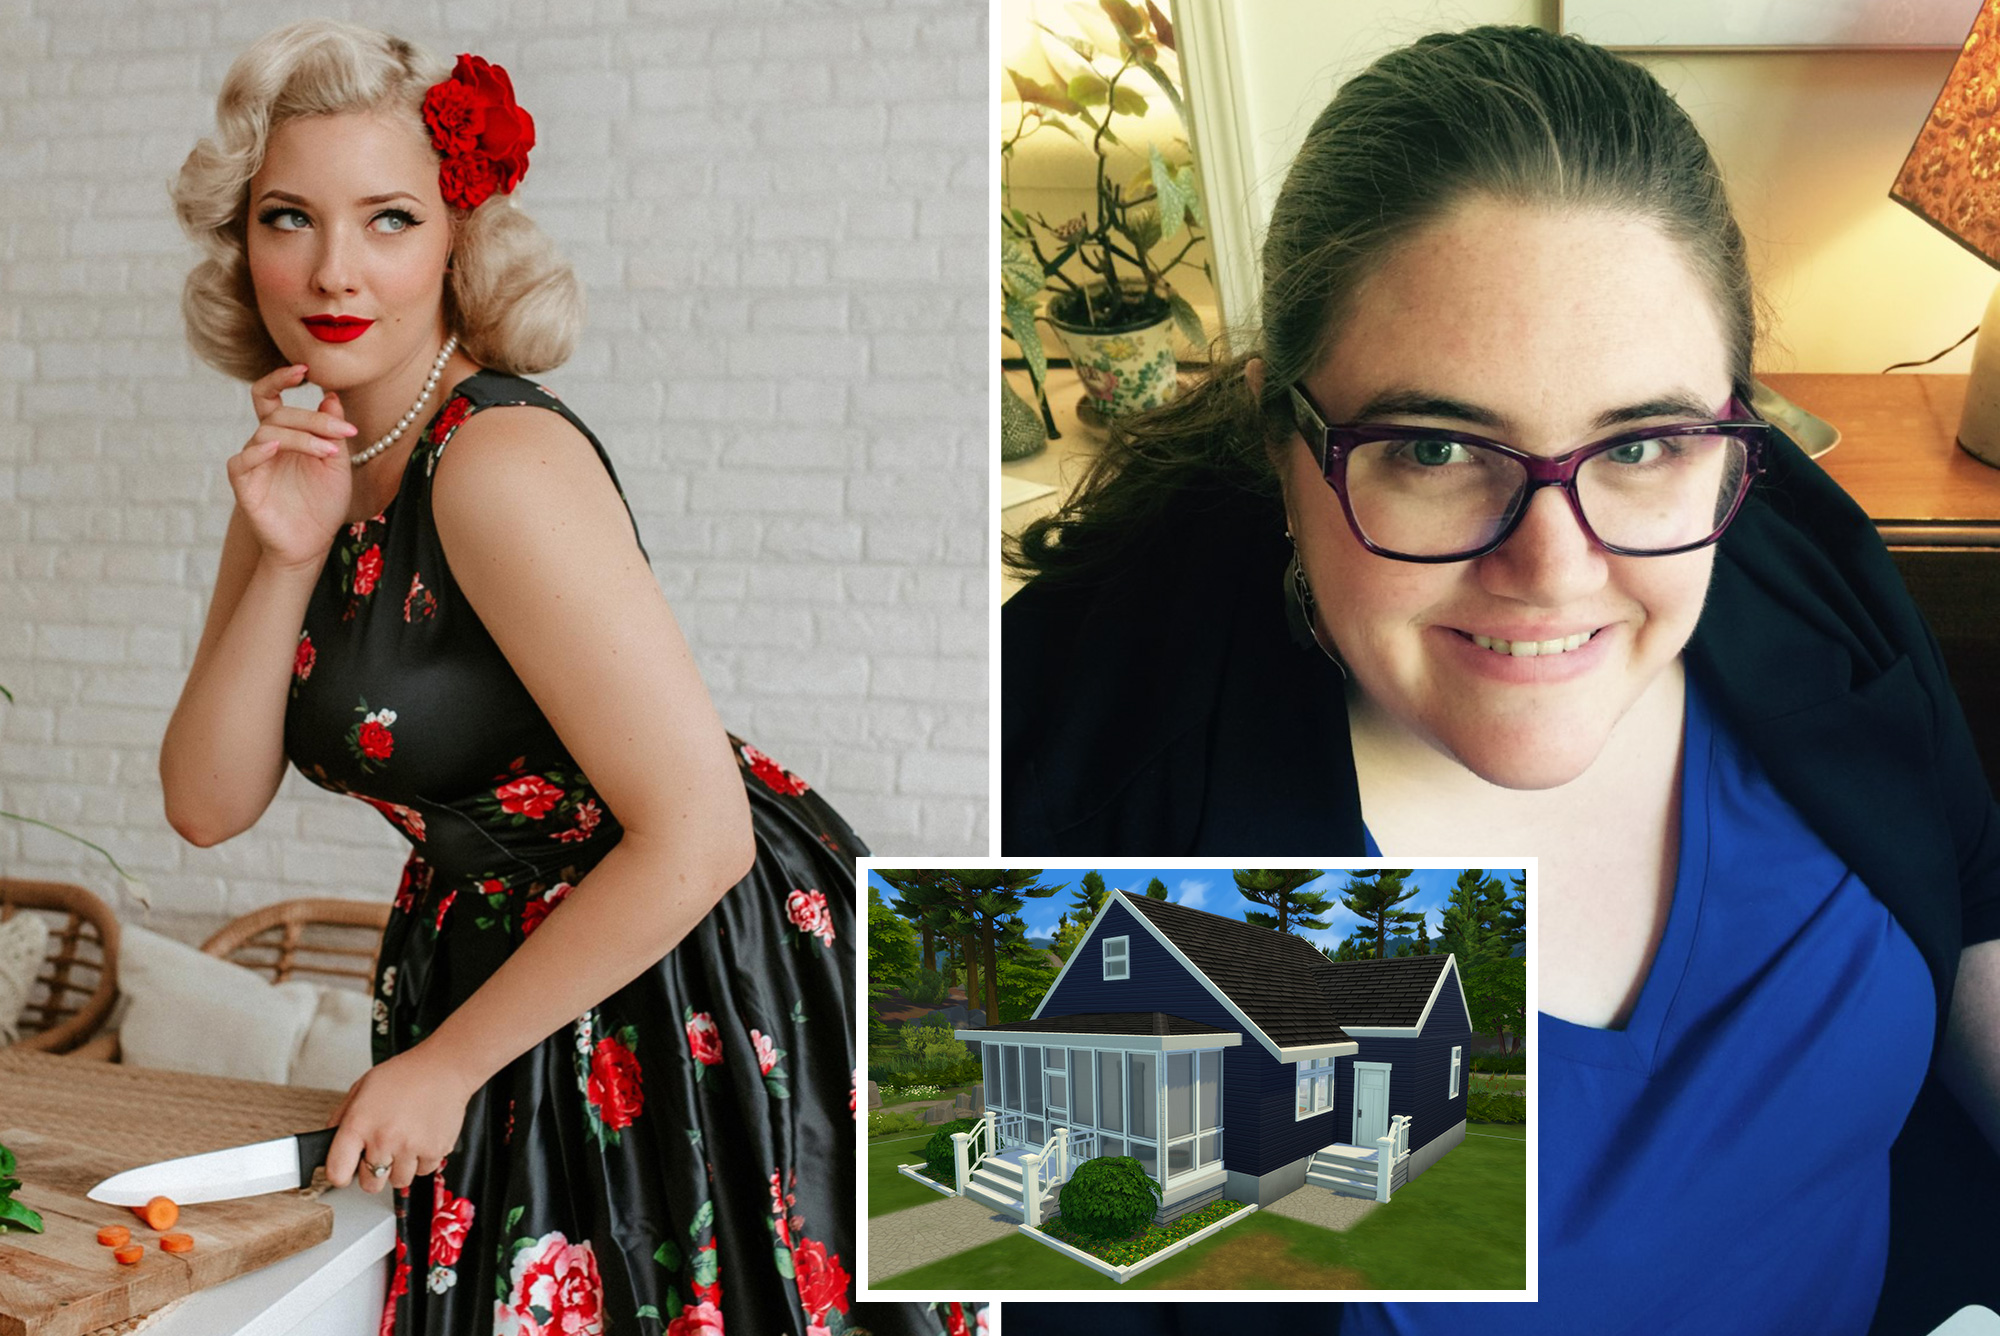 Meet The Women Who Build Houses on ‘The Sims 4’ For a Living